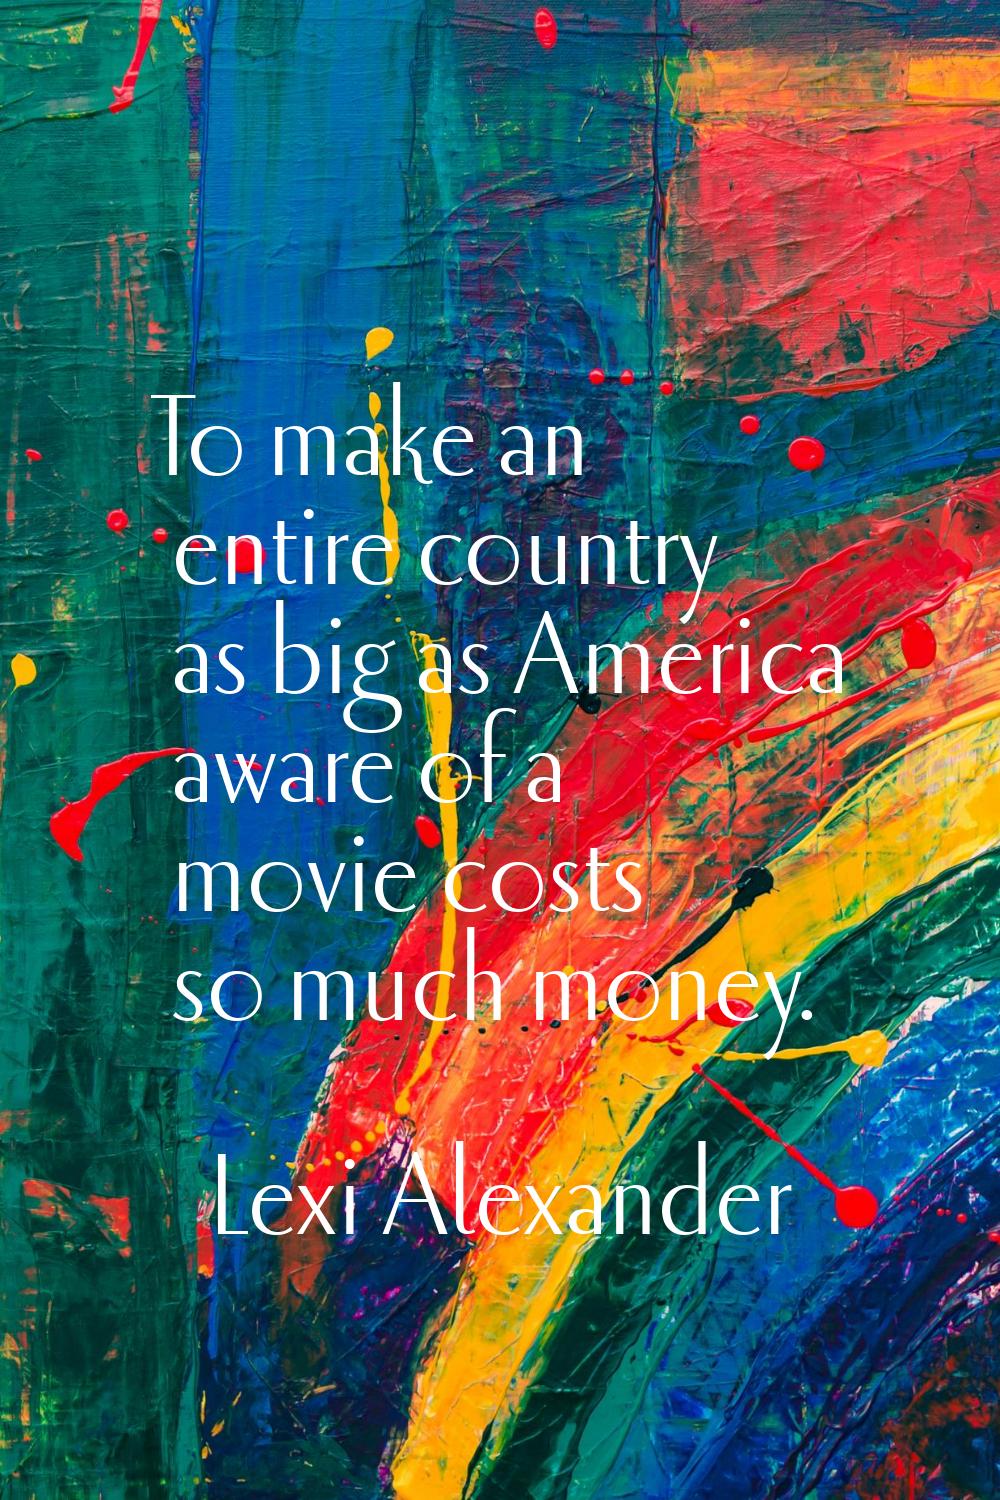 To make an entire country as big as America aware of a movie costs so much money.